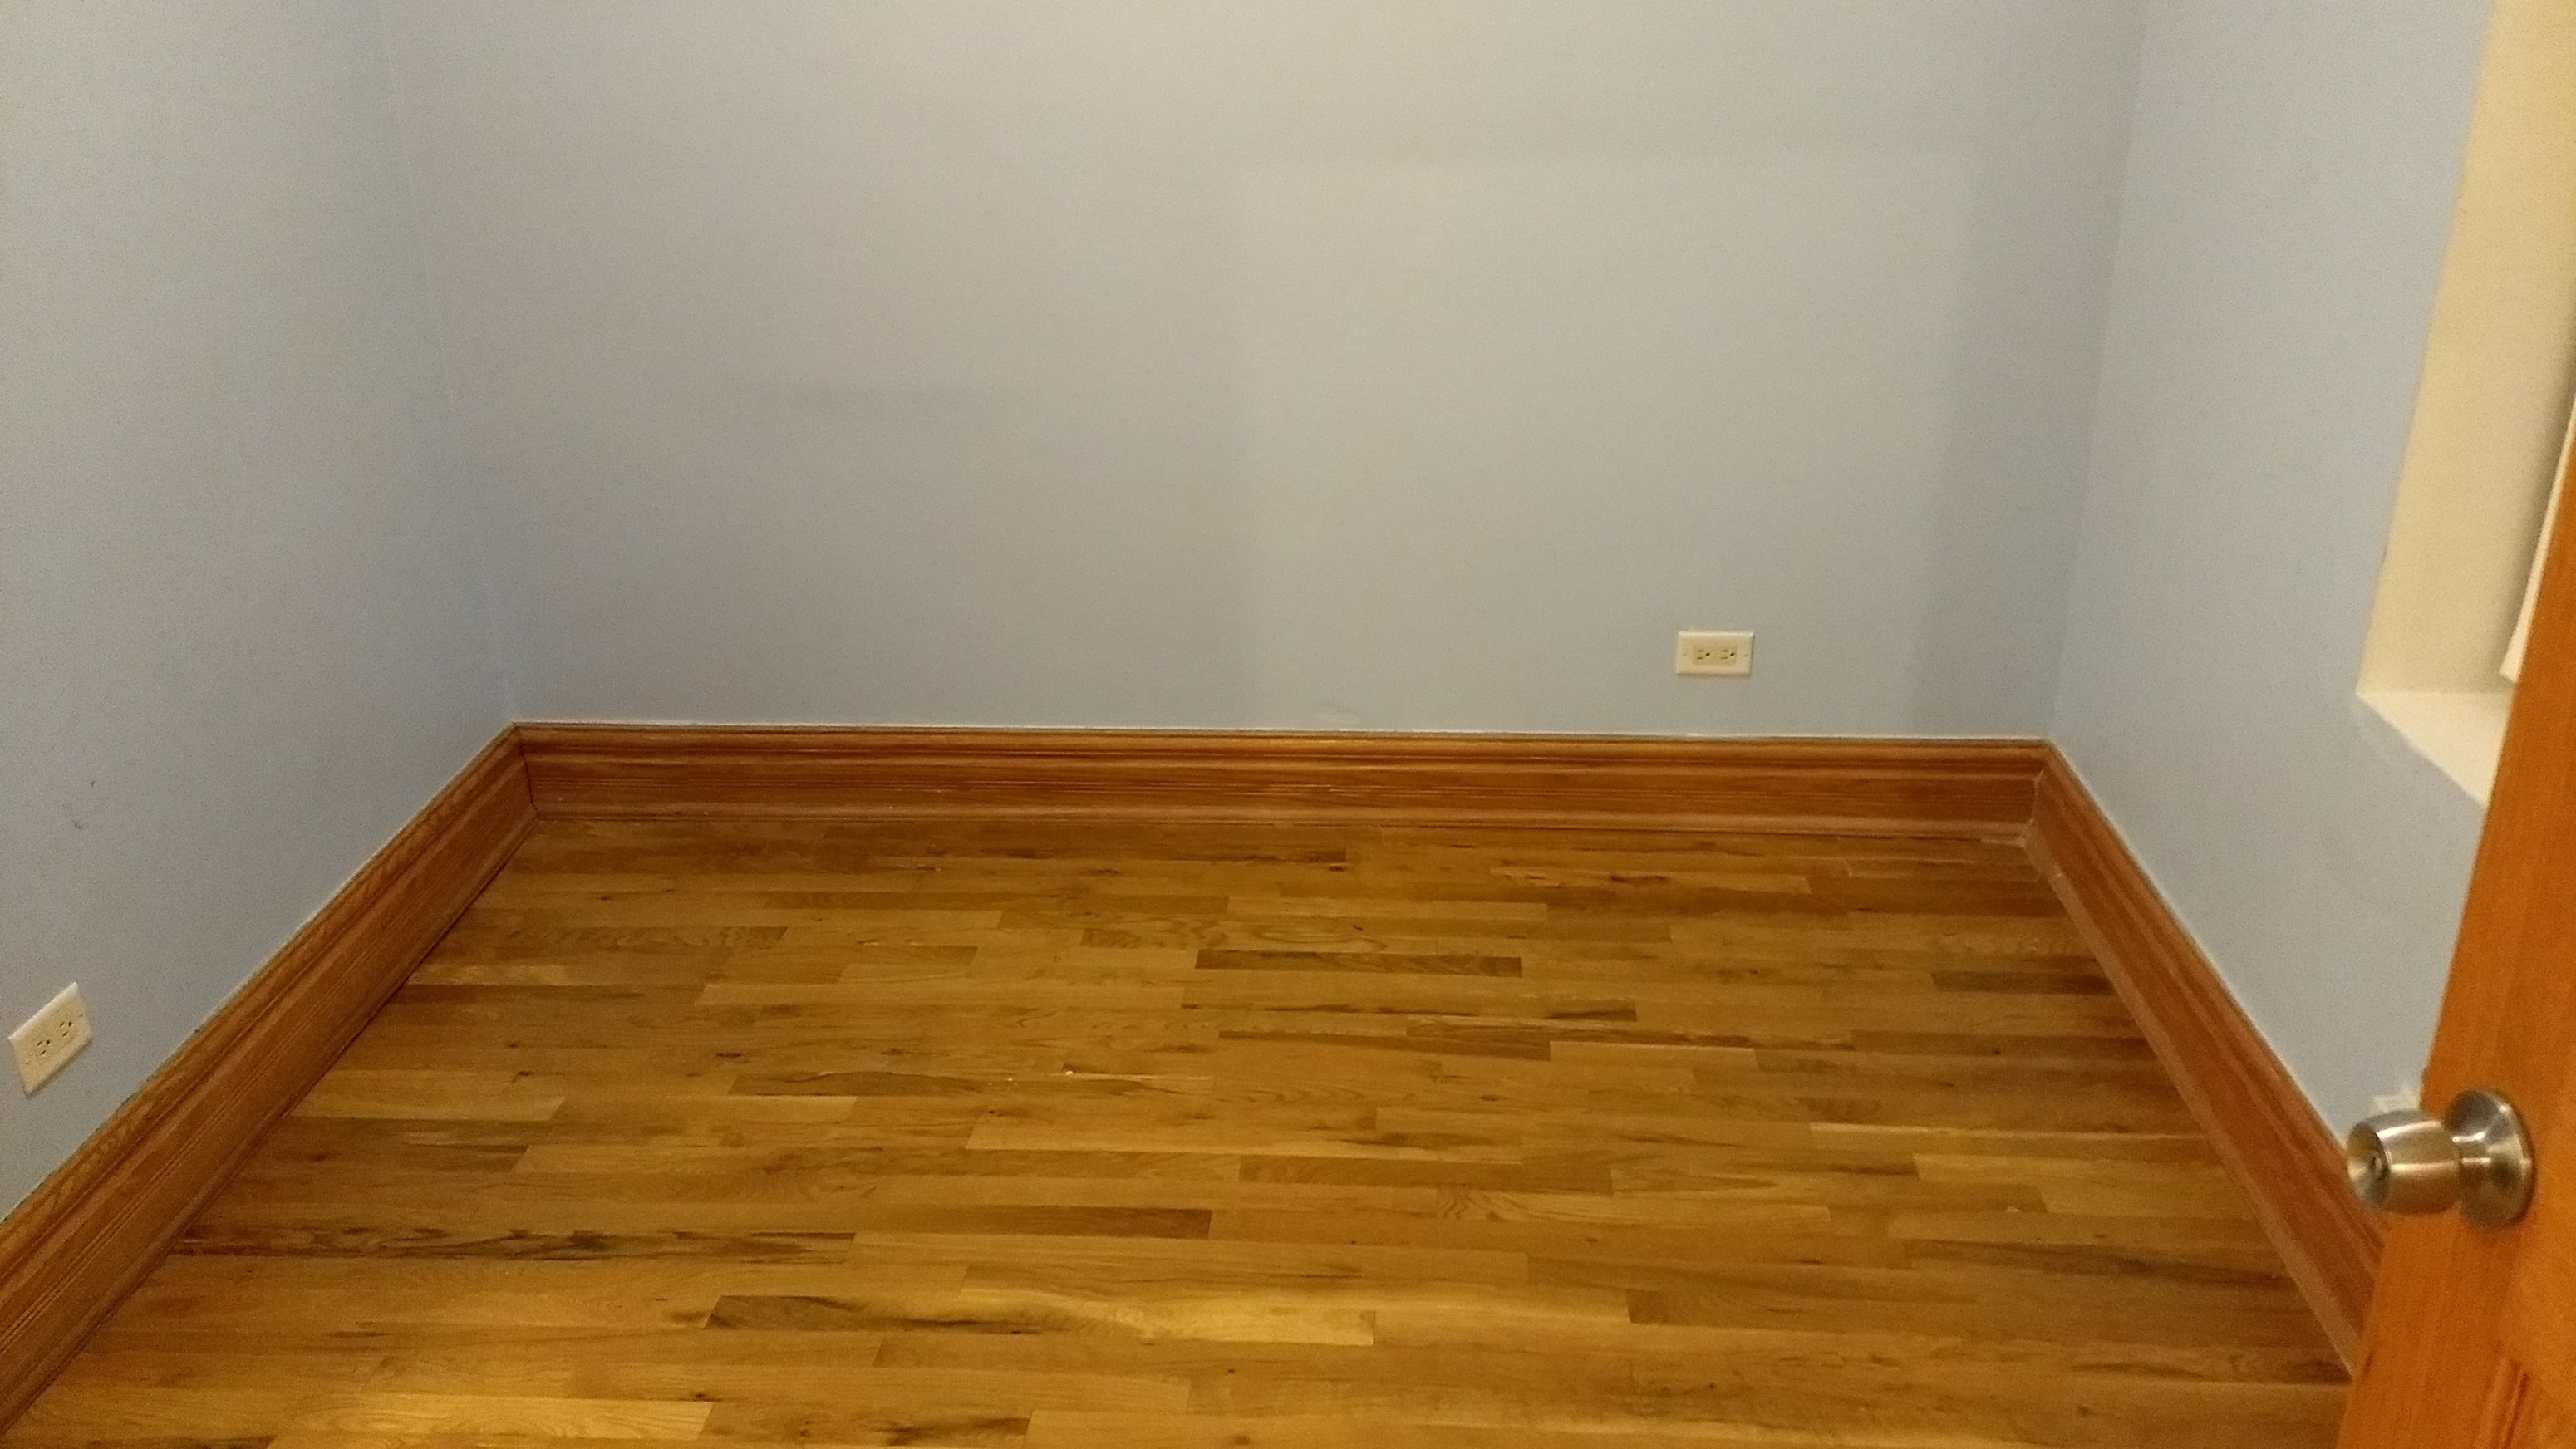 Private Room For Rent In West Town Area Of Chicago 15 Min